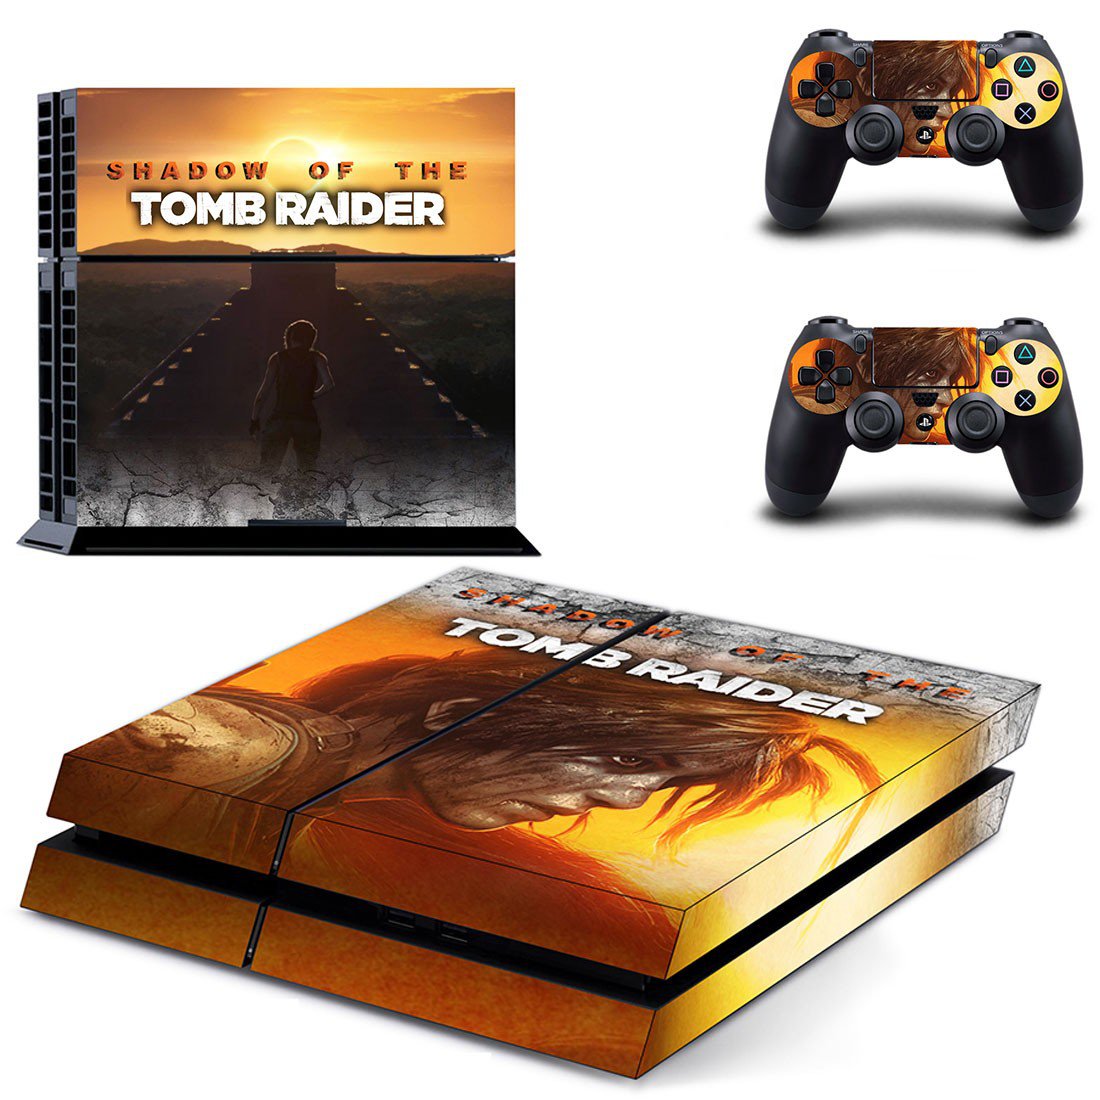 Shadow Of The Tomb Raider Decal Skin Sticker For Ps4